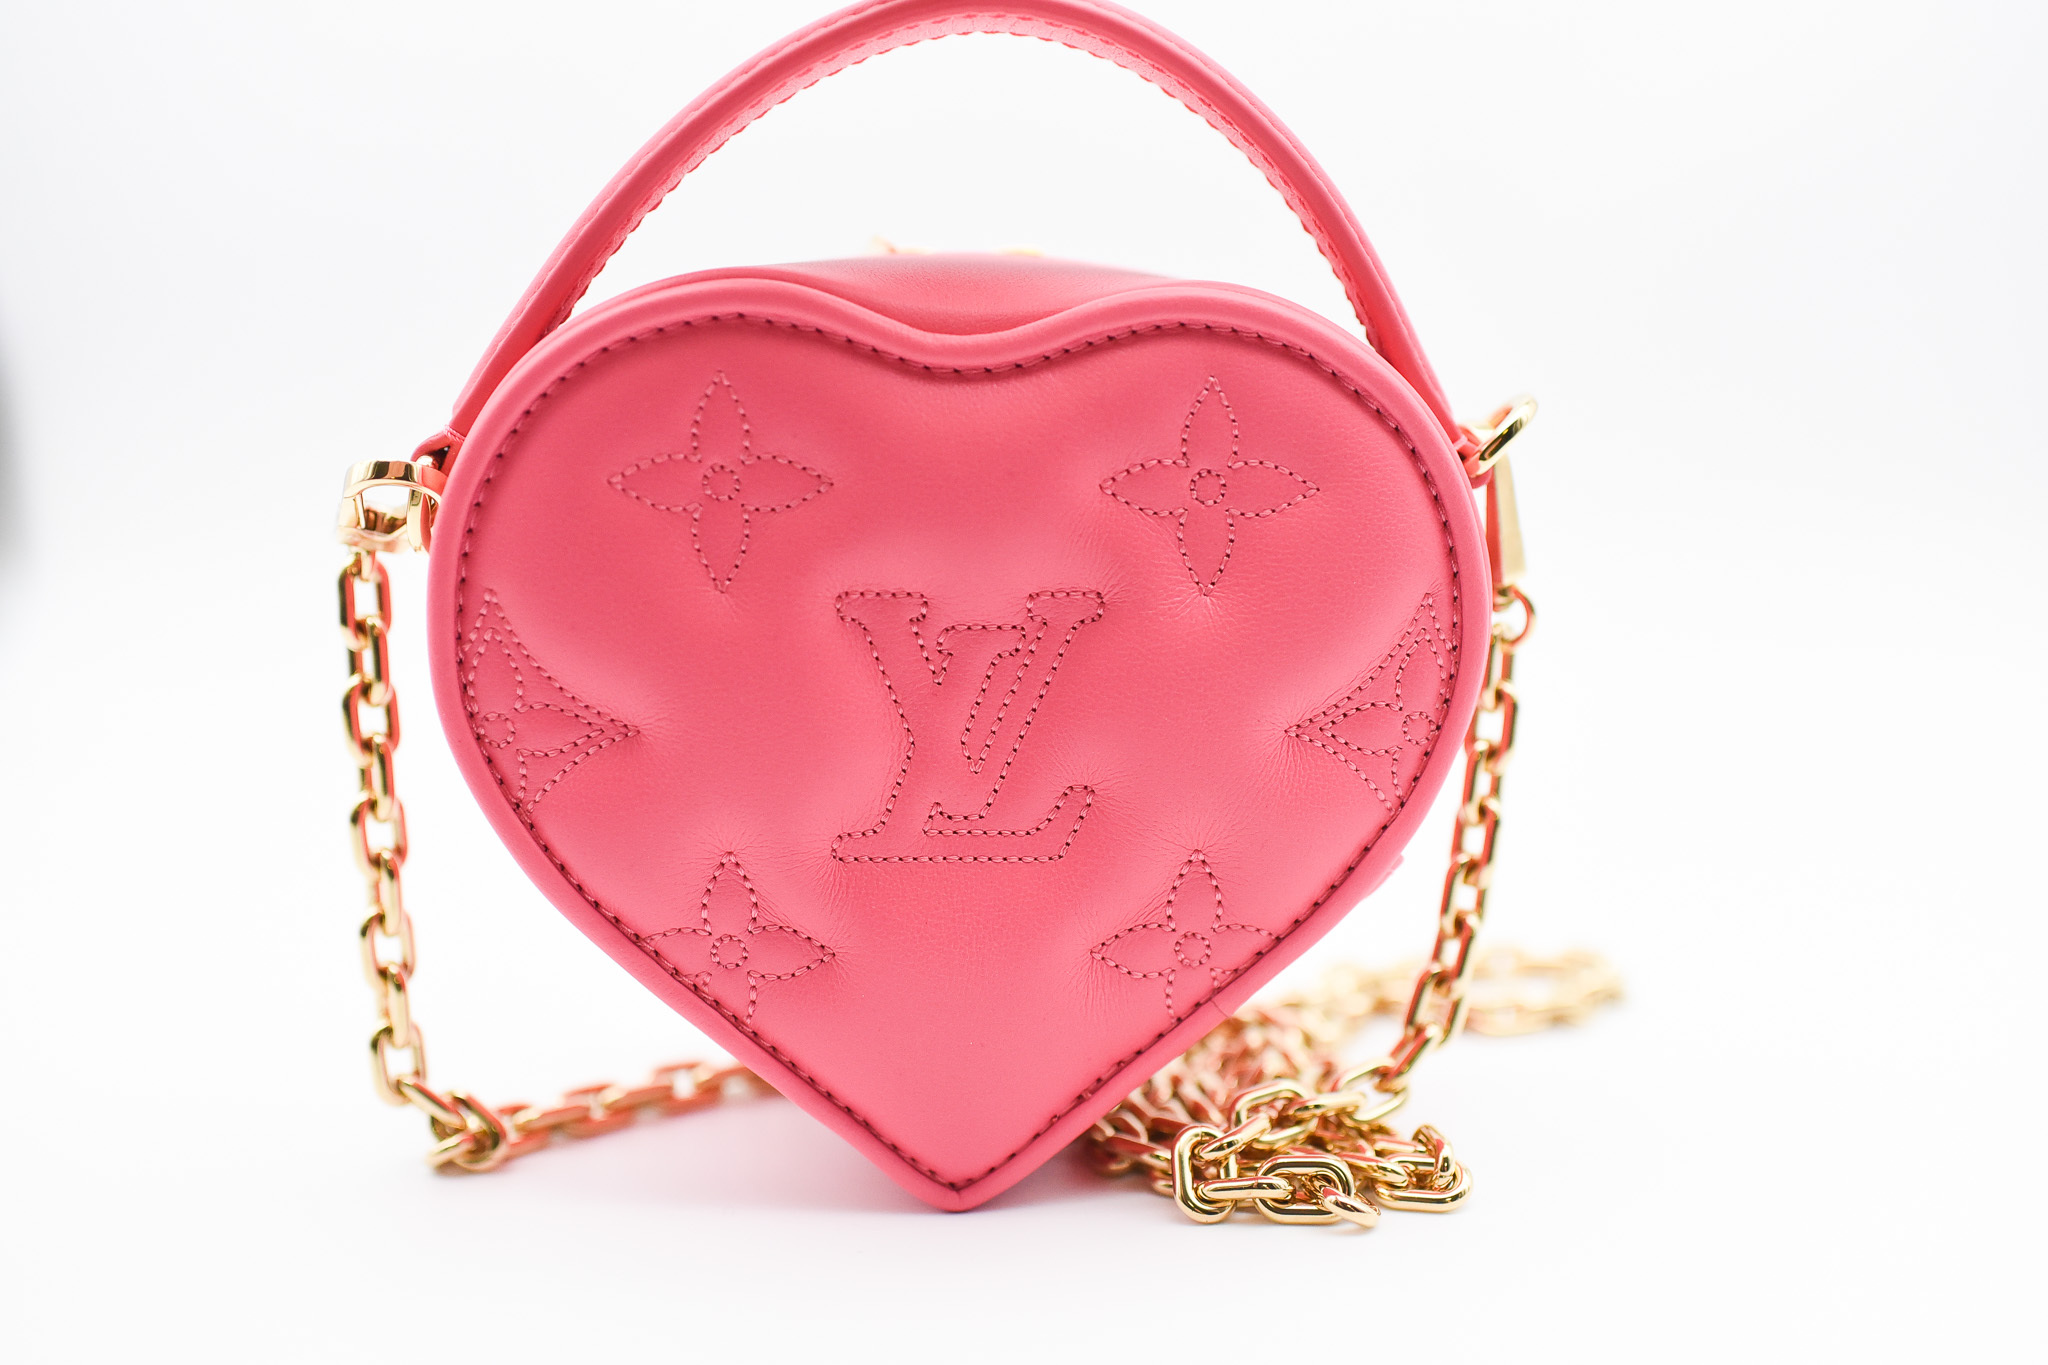 Louis vuitton Pop My Heart Bag  Gallery posted by DorisJLuxFinds